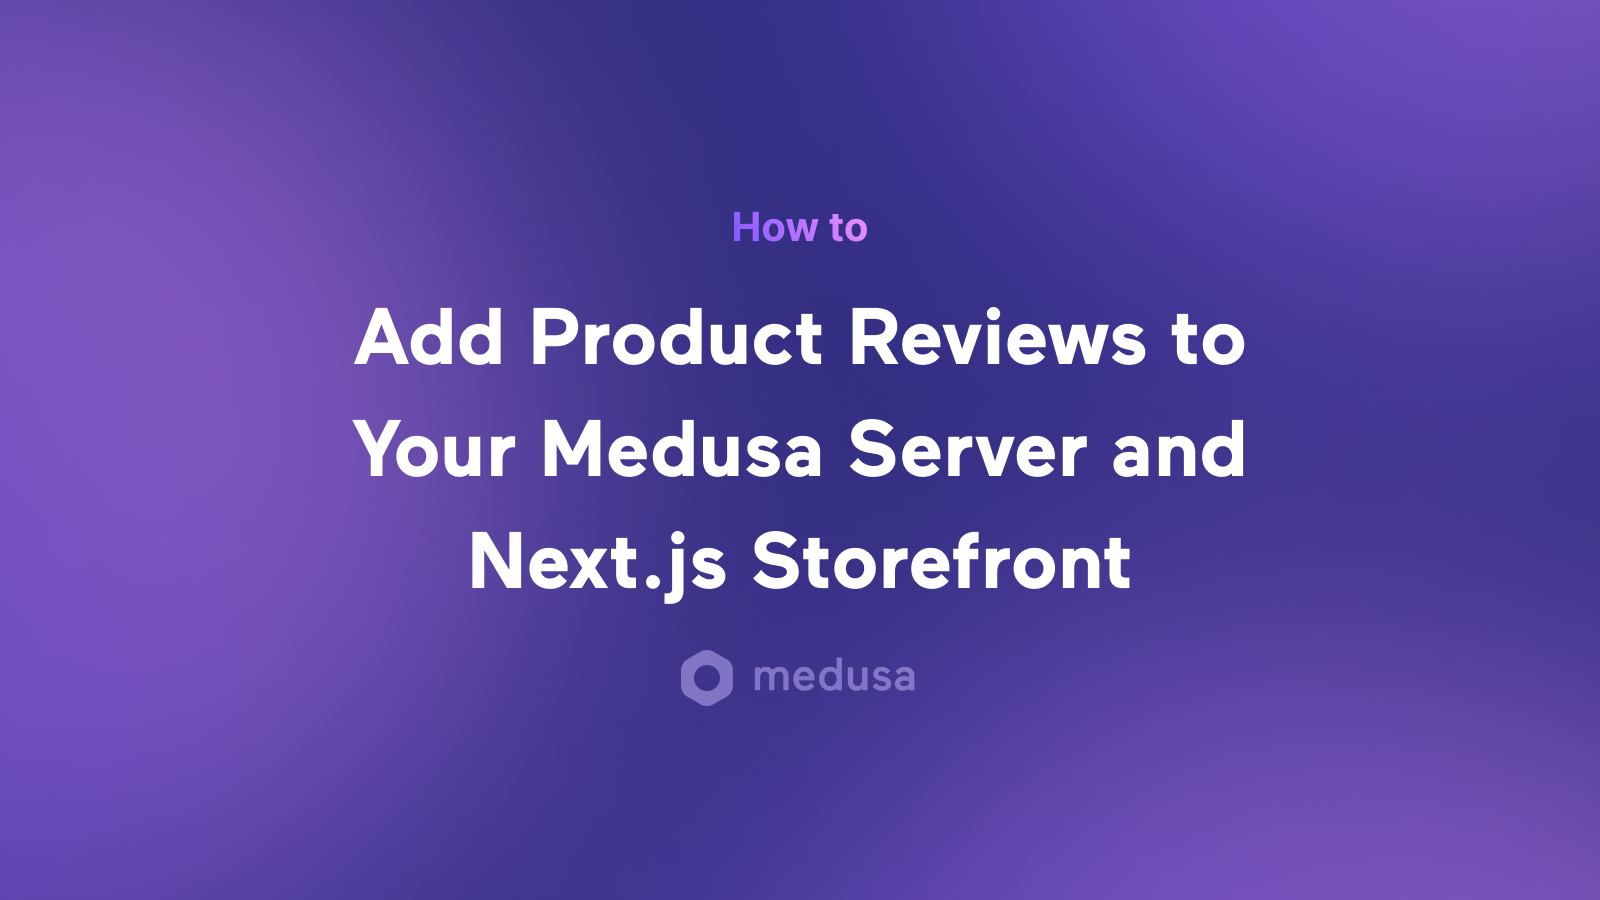 How to Add Product Reviews to Your Medusa Server and Next.js Storefront